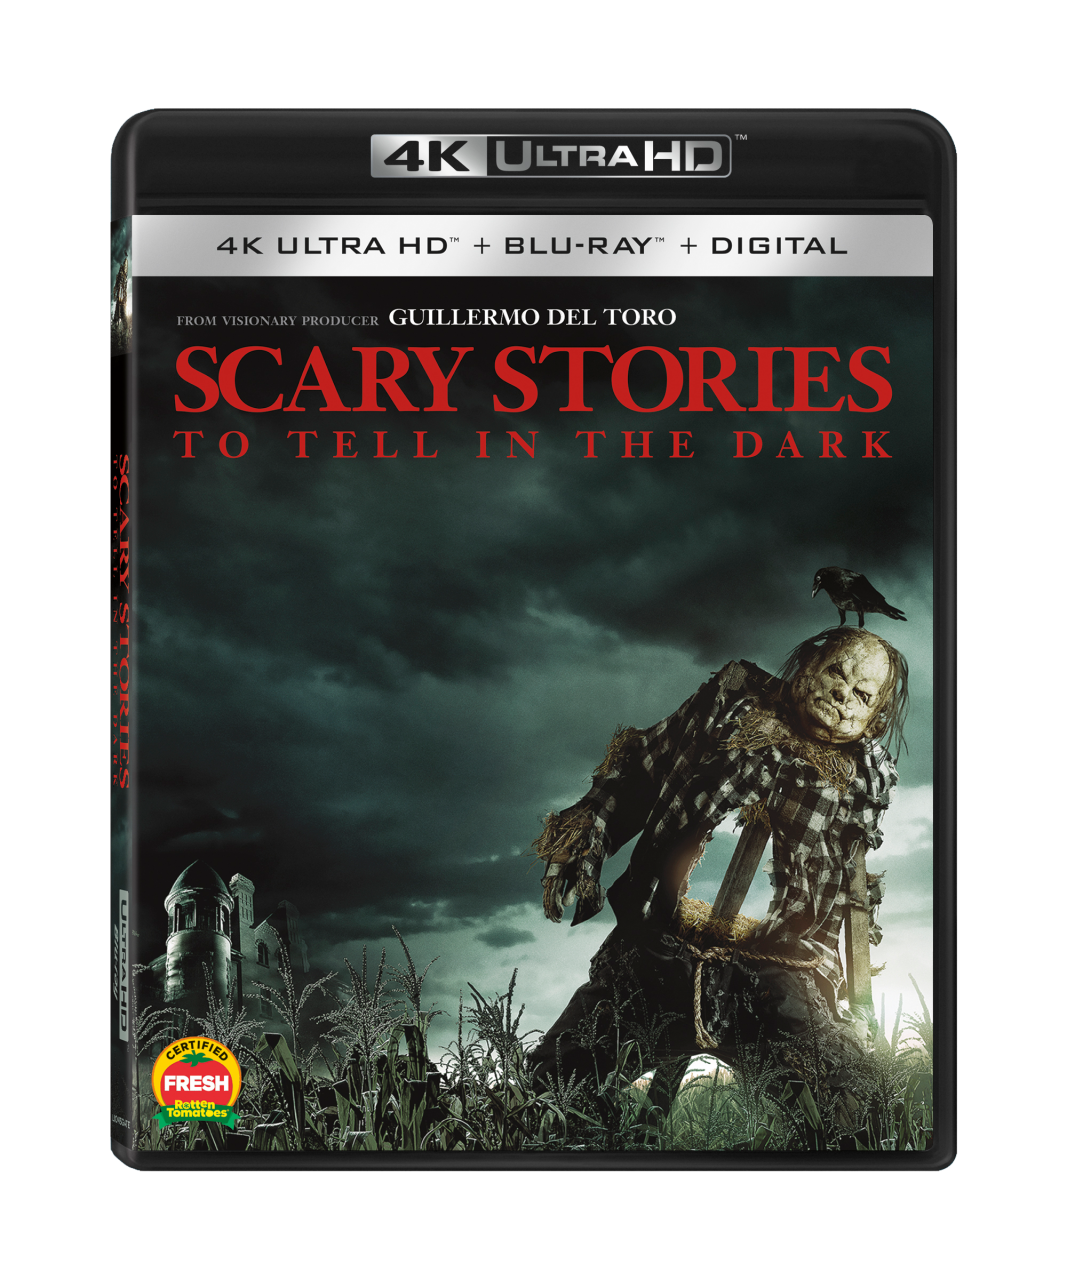  Scary Stories To Tell In The Dark 4K Ultra HD Combo Pack cover (Lionsgate Home Entertainment)